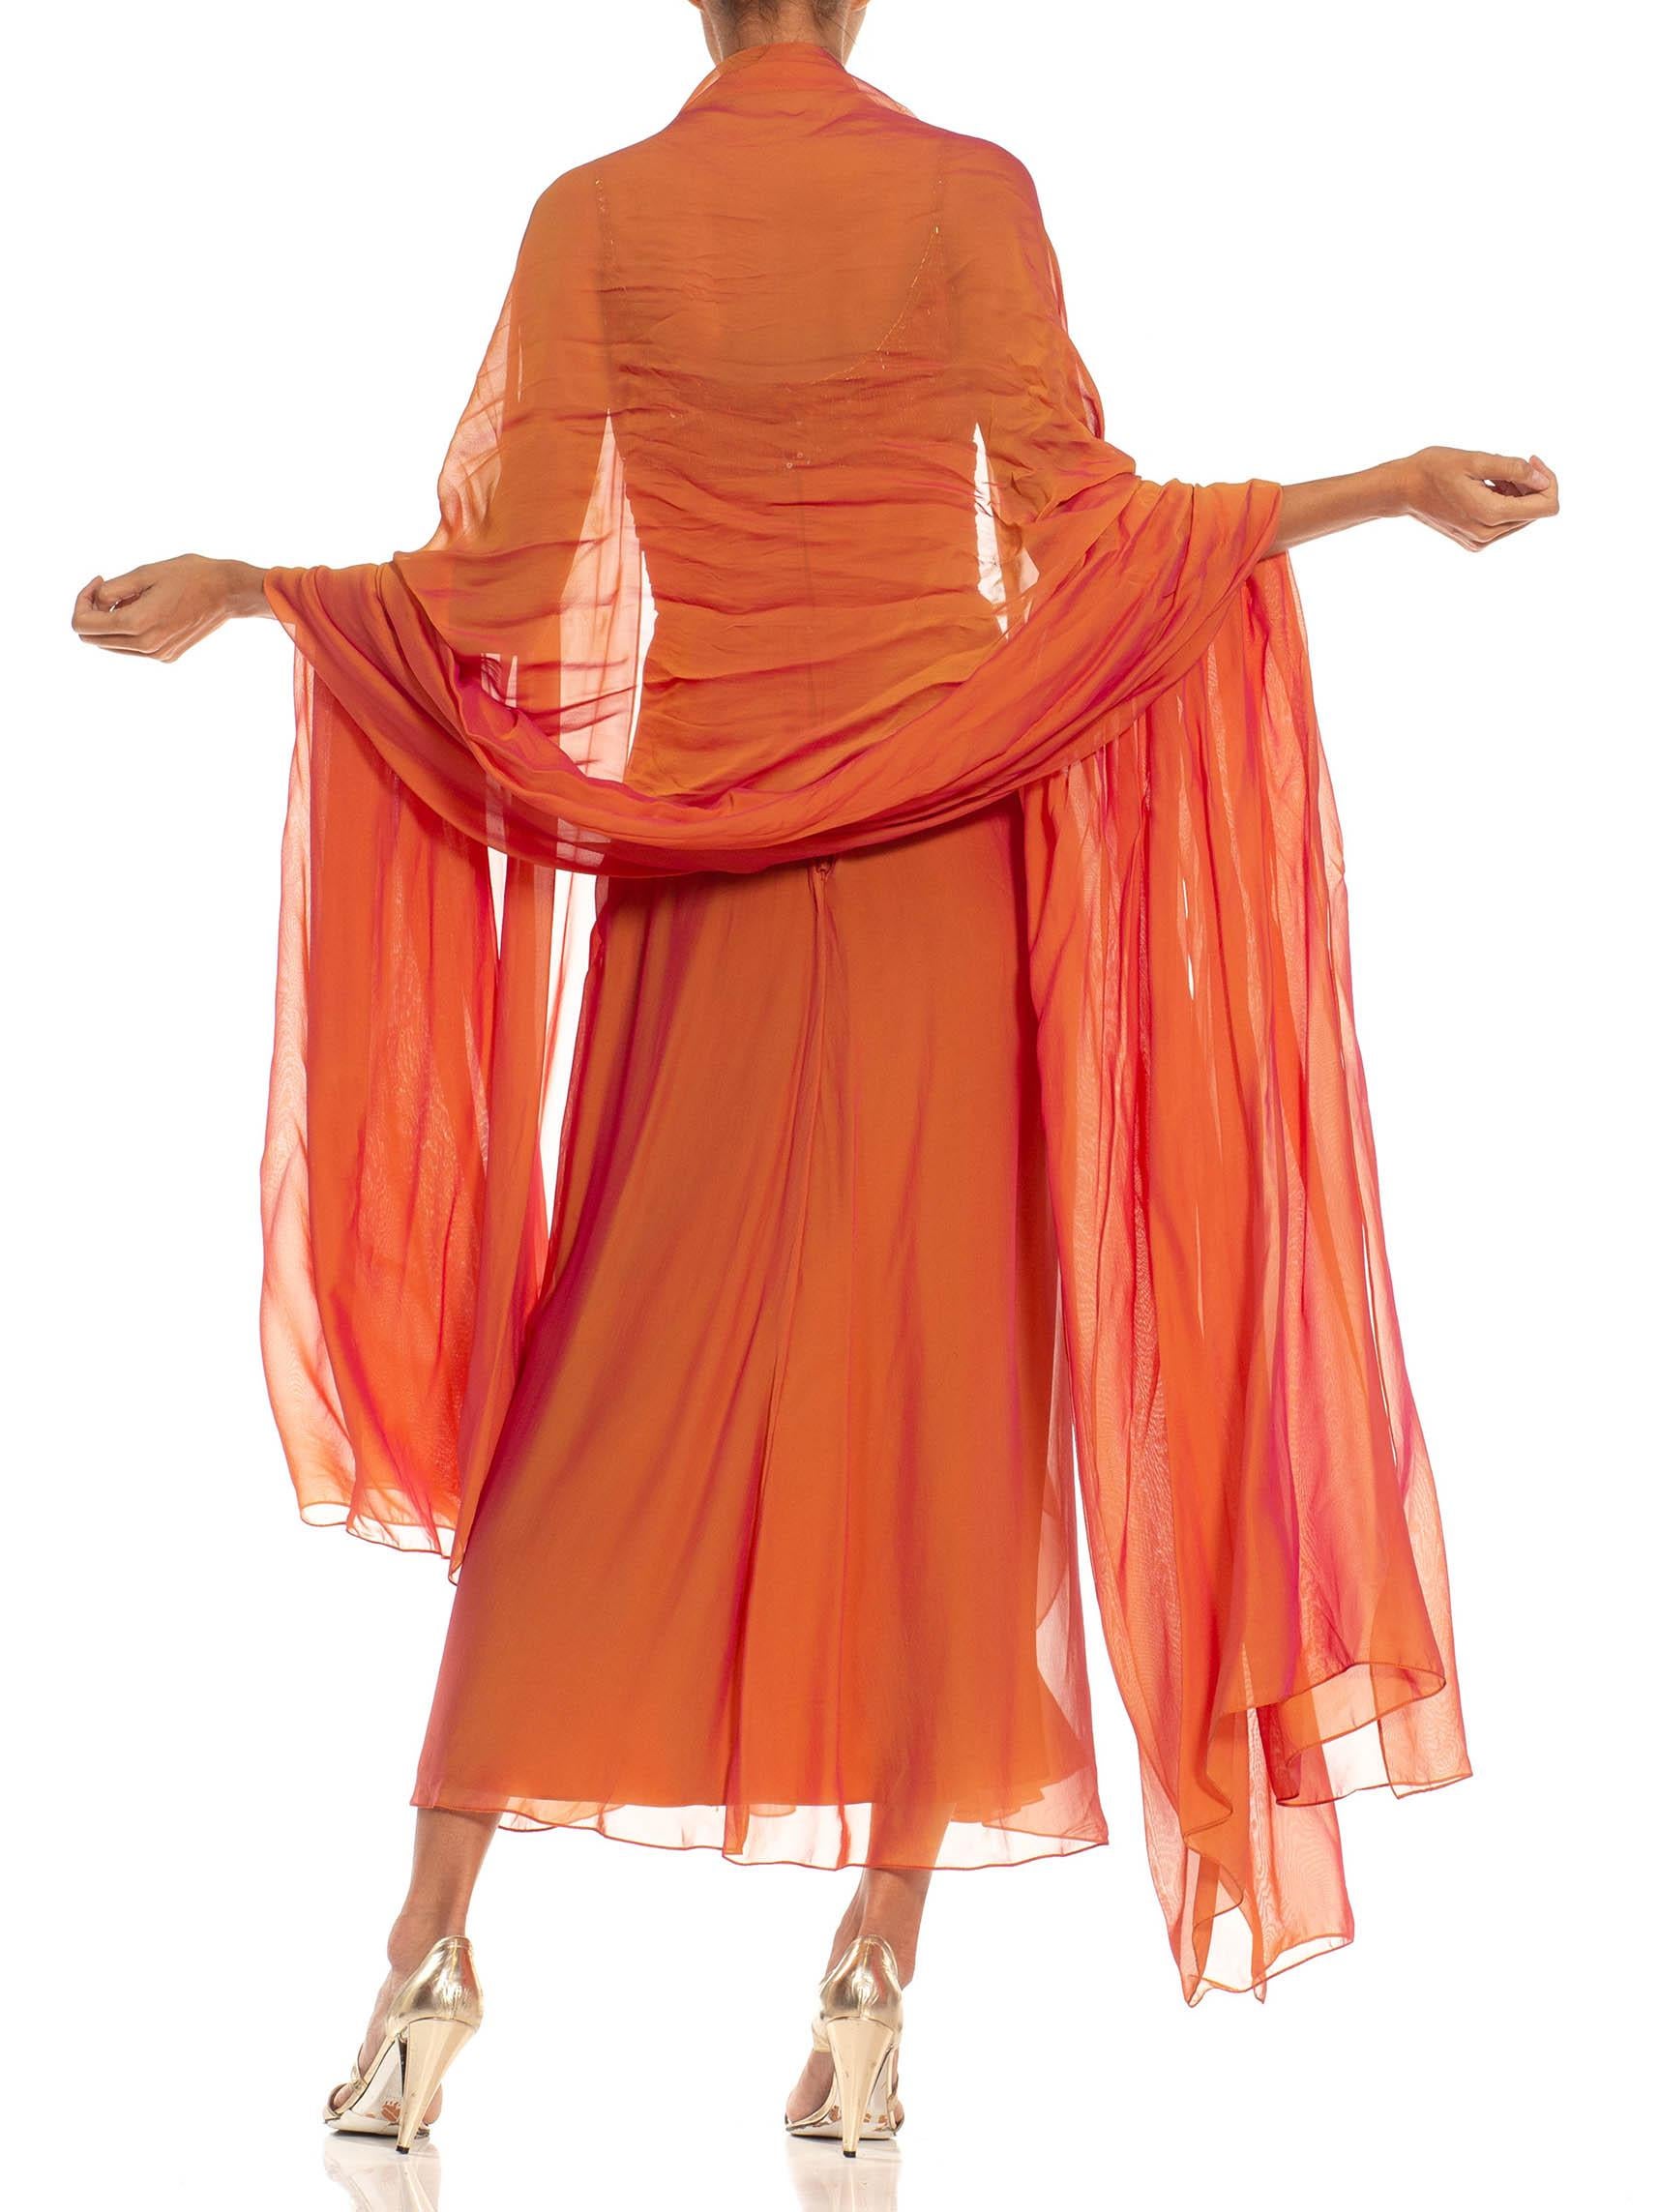 1980S BOB MACKIE Golden Orange Irridescent Silk Chiffon Beaded Gown With Matchin In Excellent Condition For Sale In New York, NY